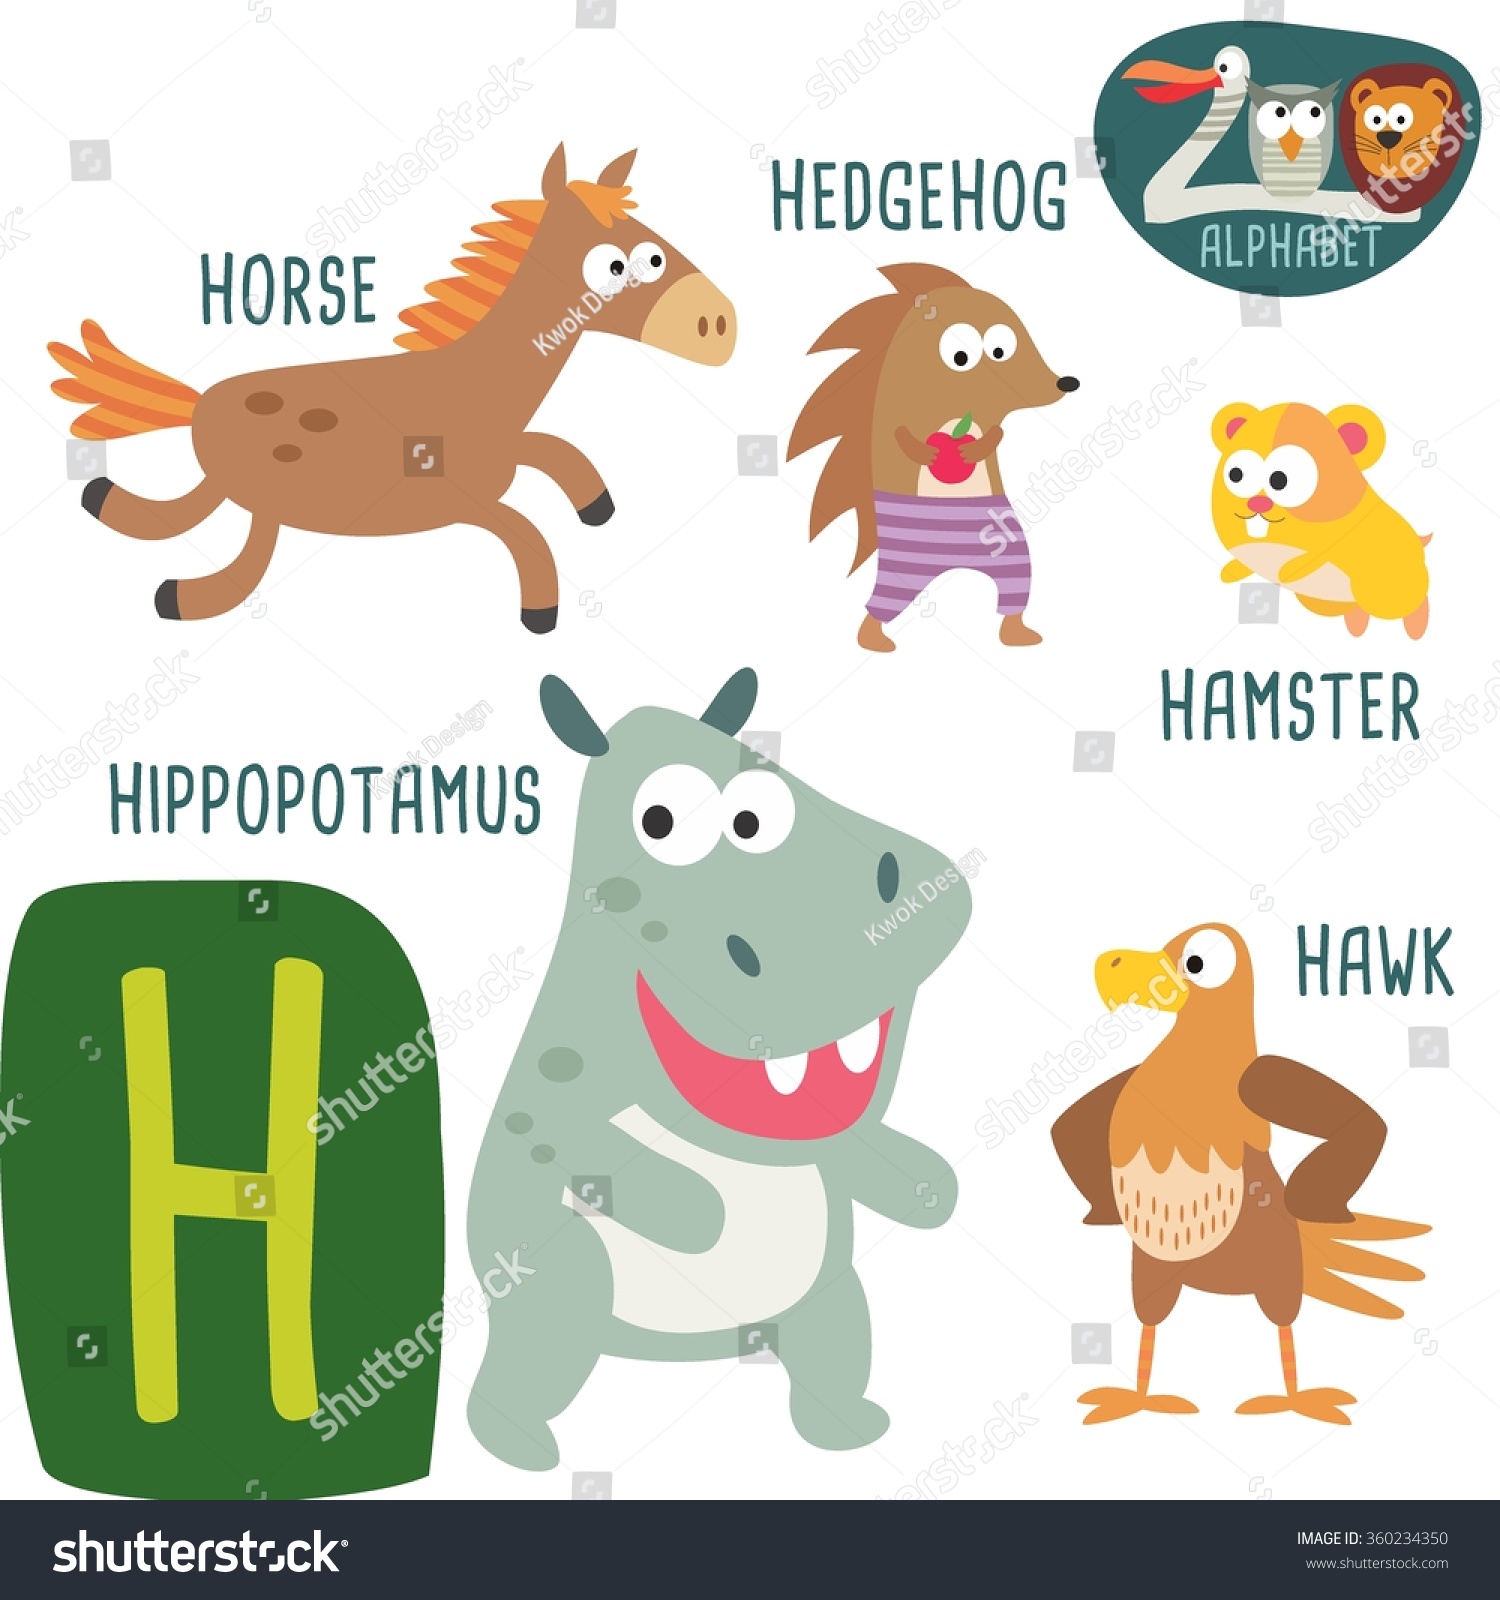 Cute Zoo Alphabet In Vector.H Letter. Funny Cartoon Animals: Horse